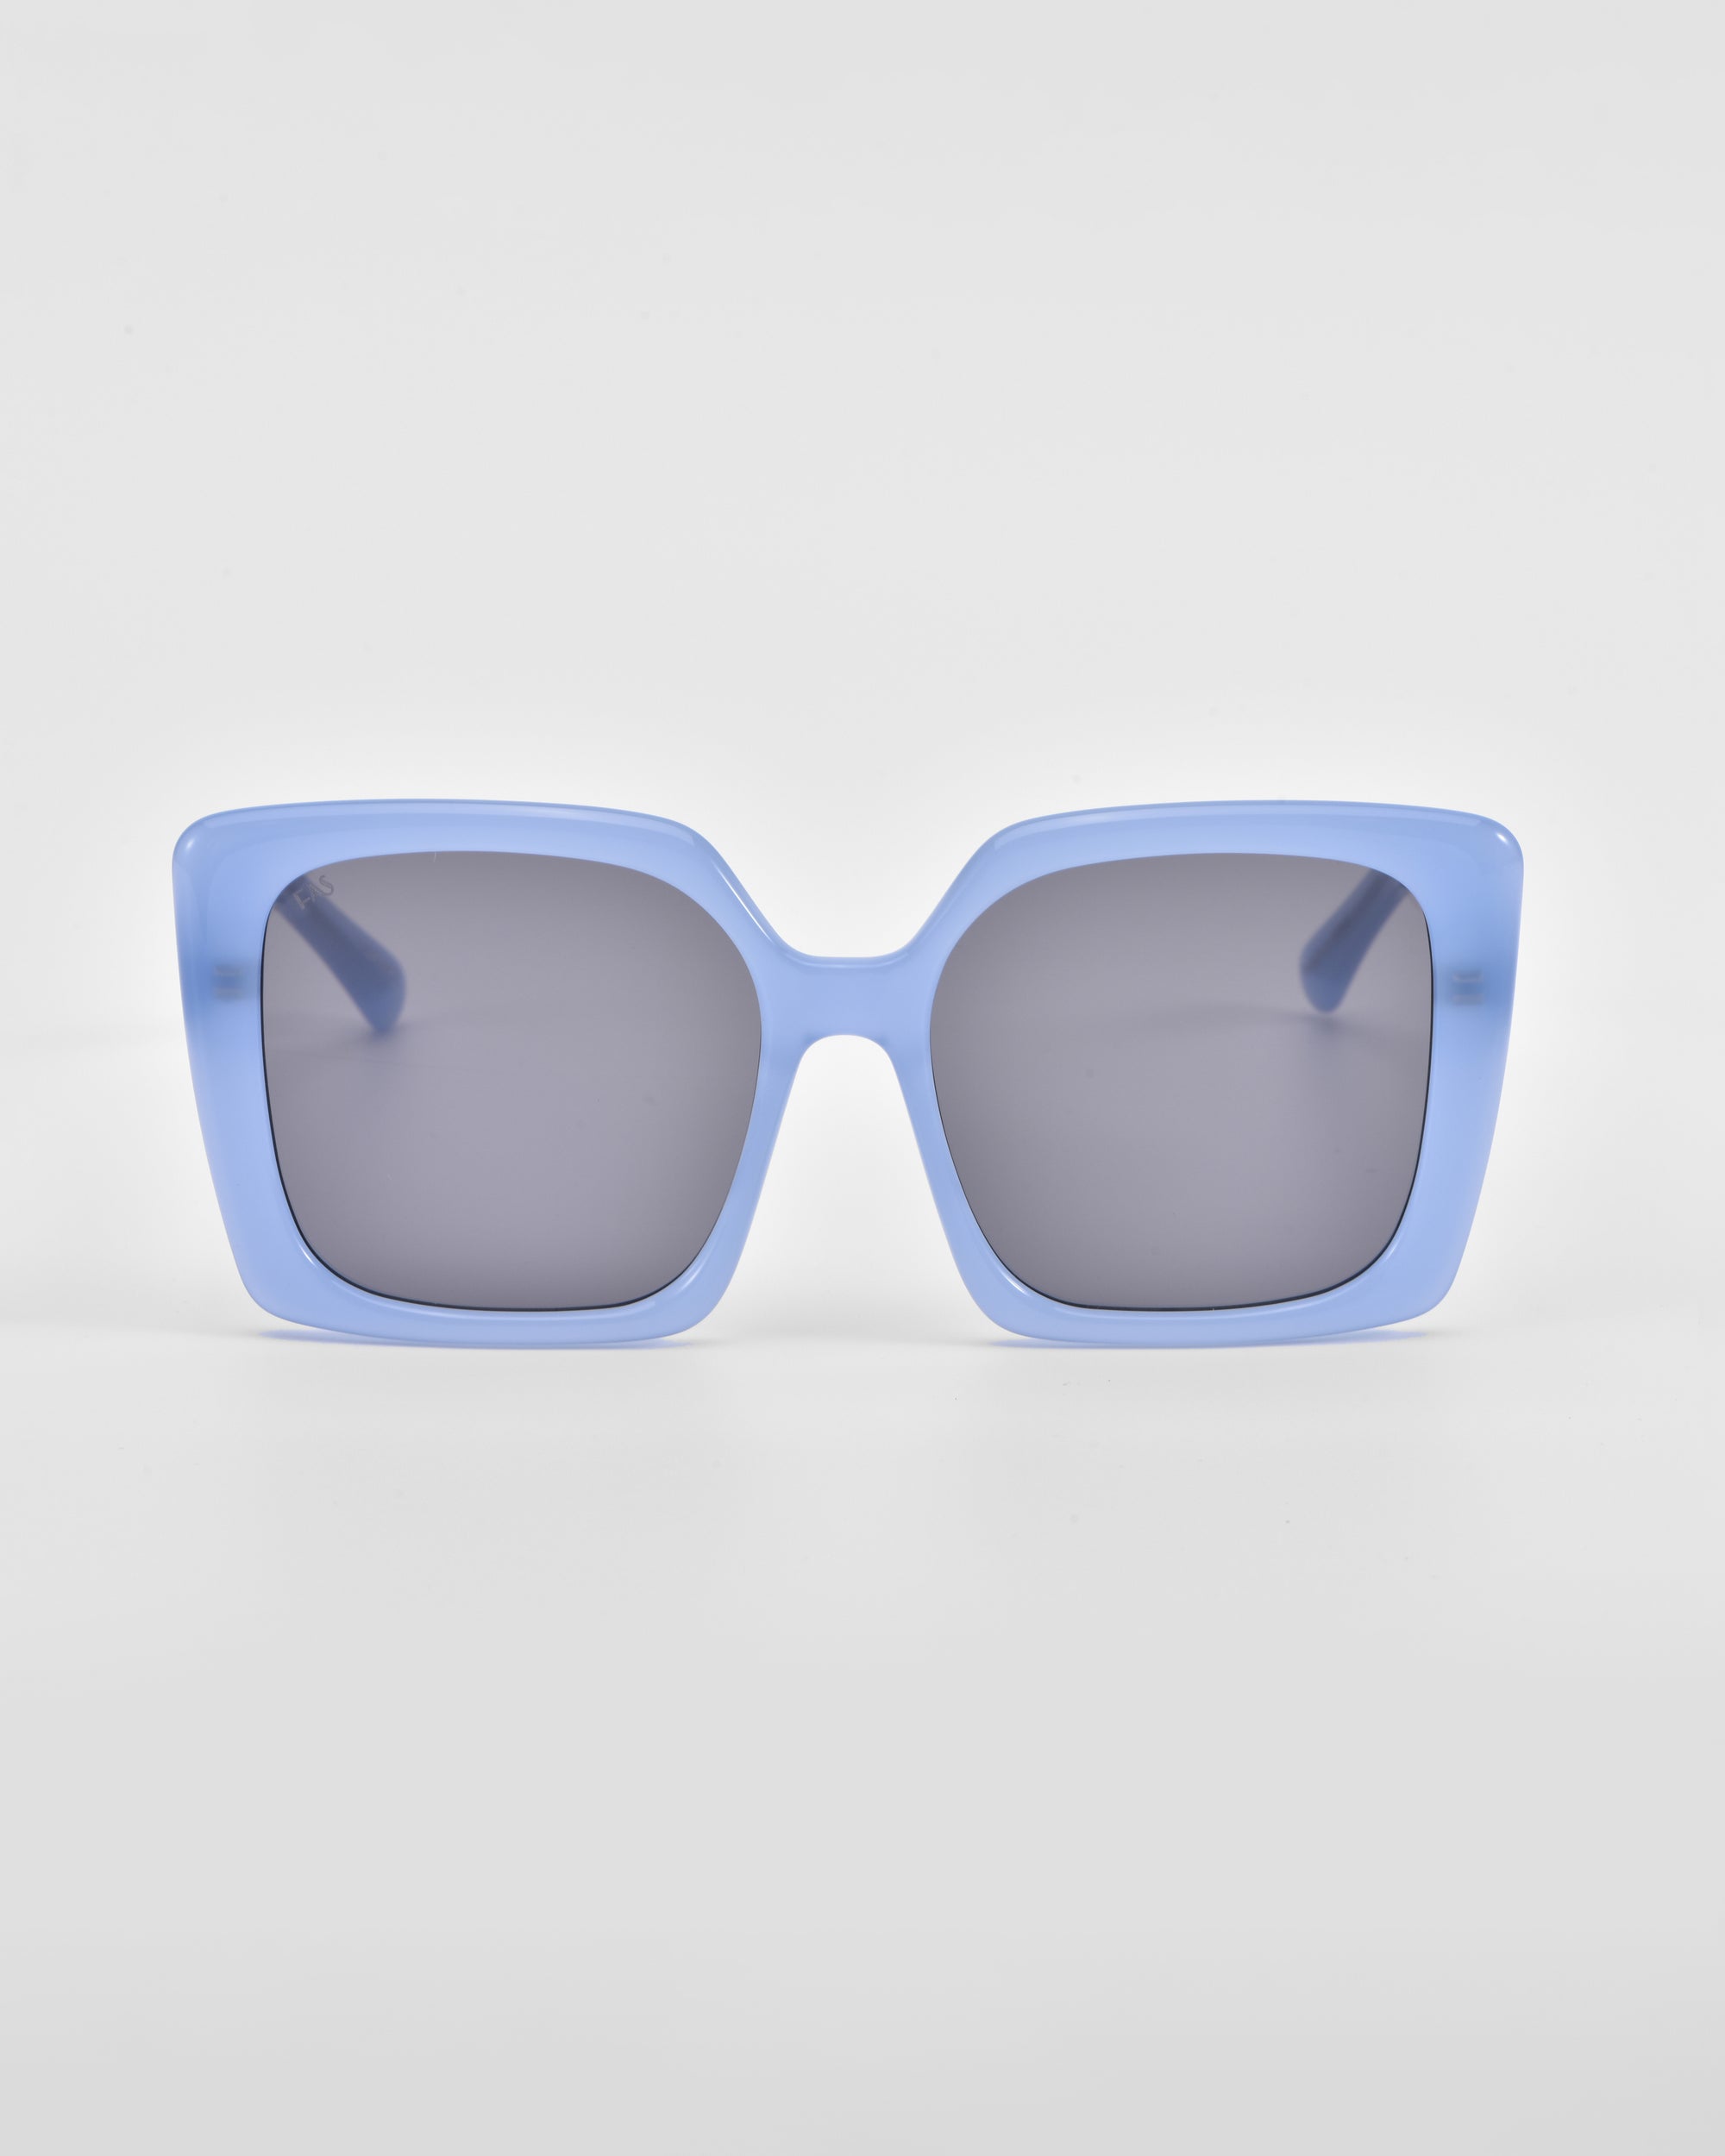 A pair of oversized, square For Art&#39;s Sake® Eos sunglasses with light blue frames and dark lenses against a white background.